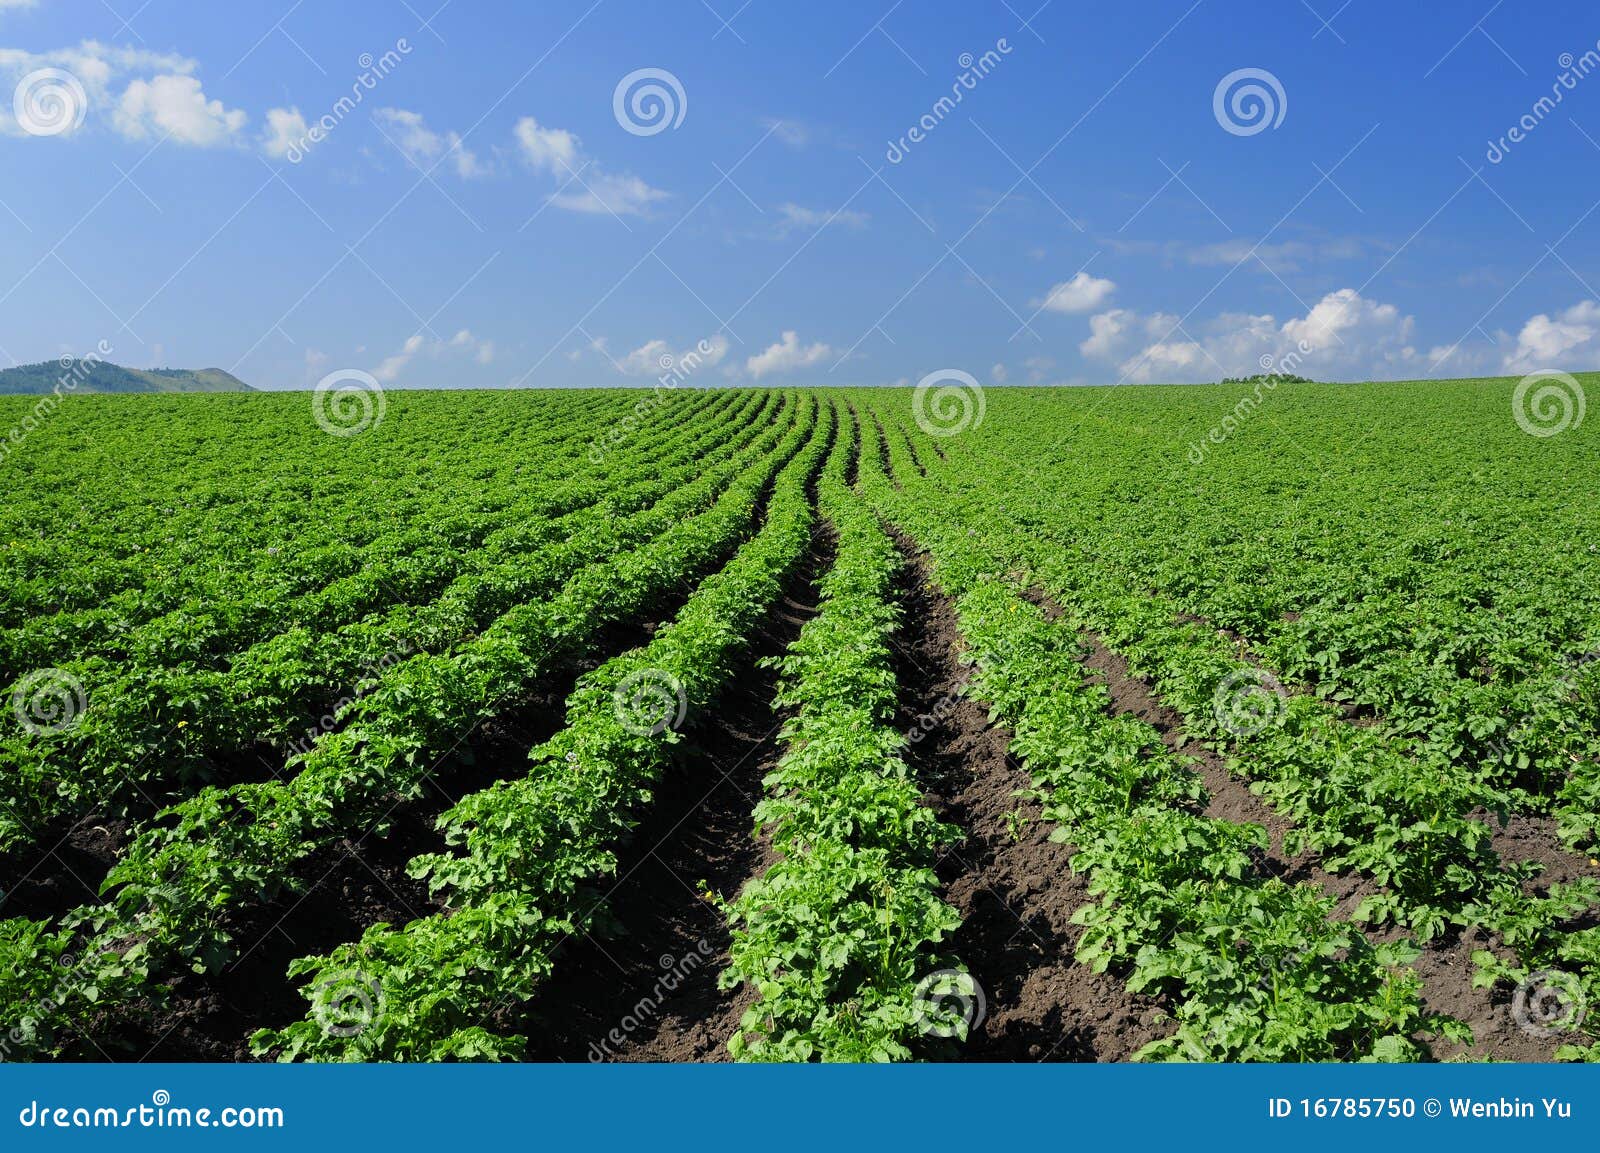 crops and in the furrow